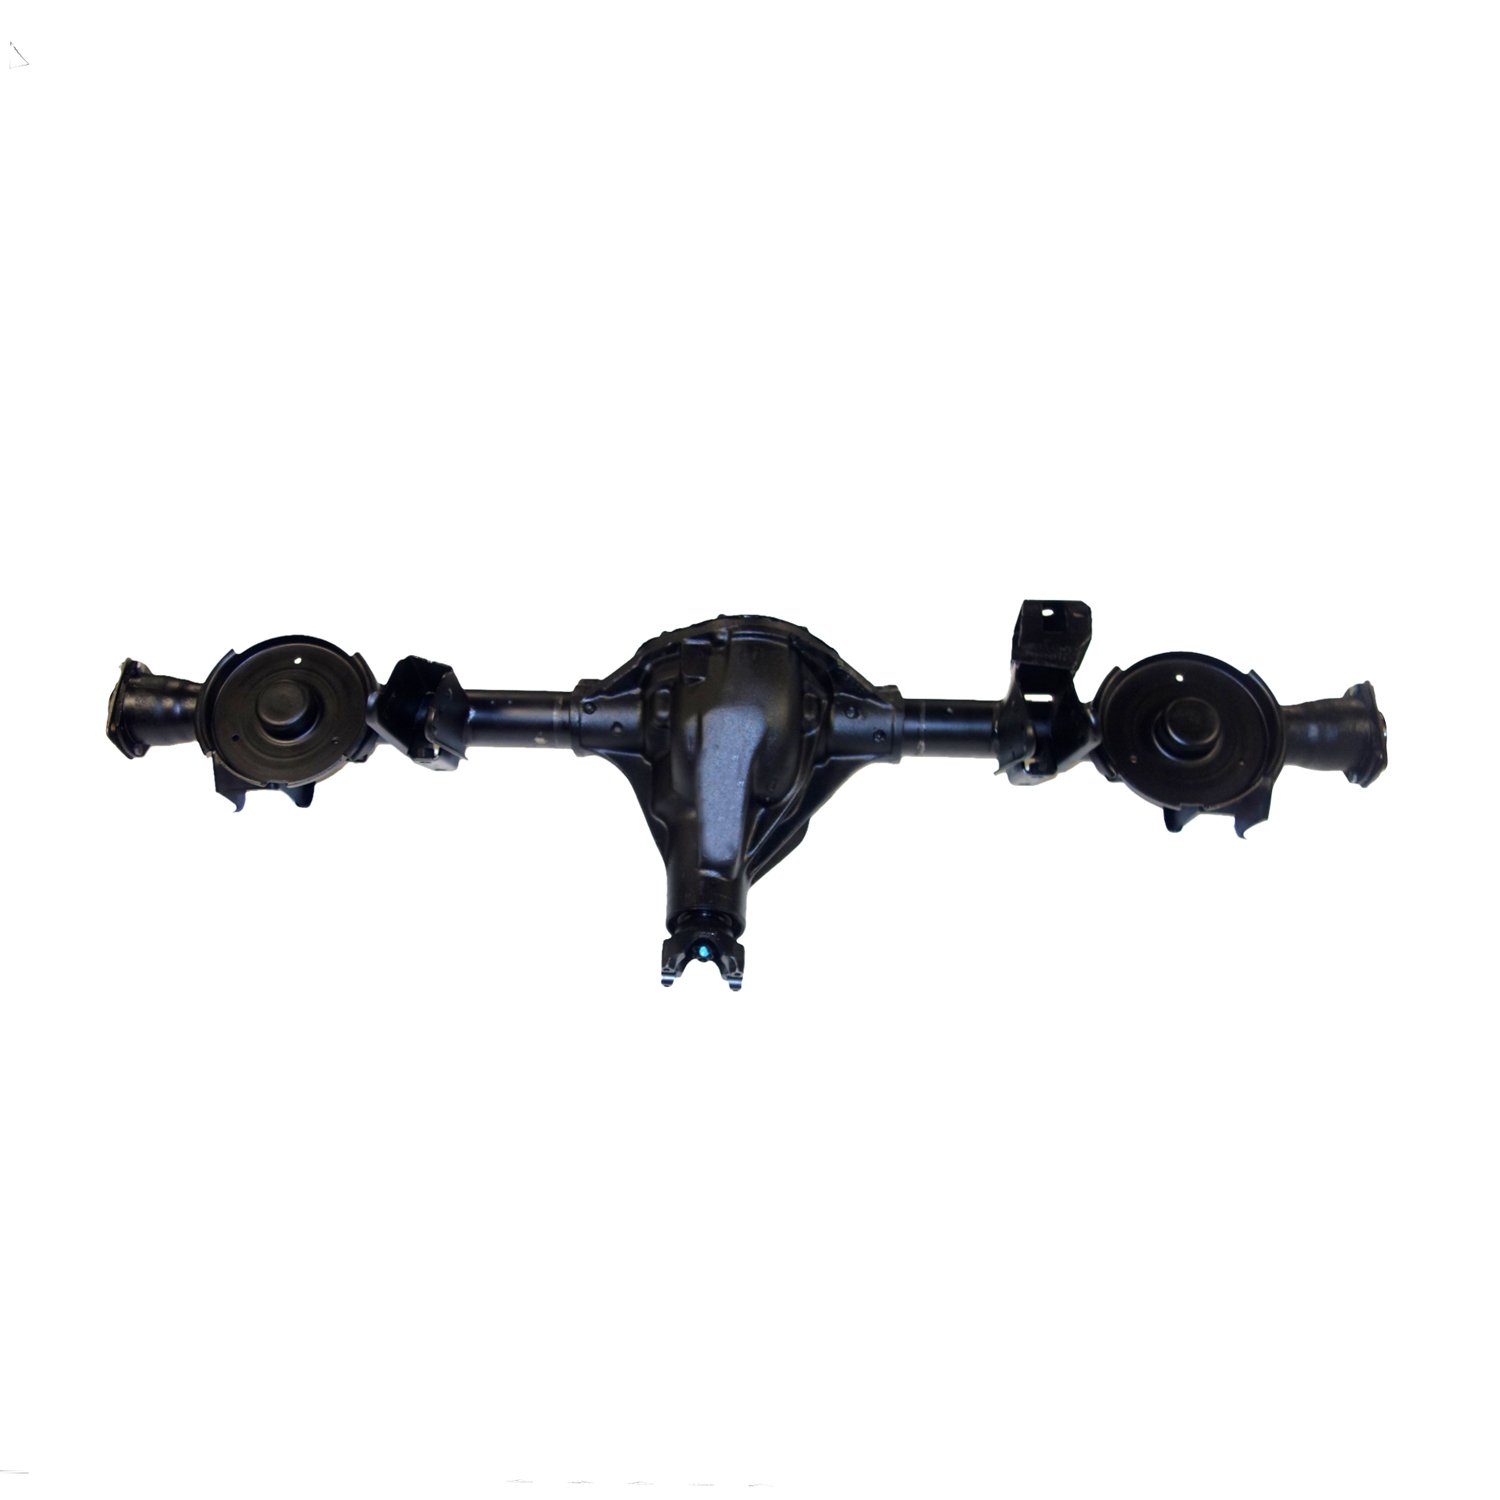 Remanufactured Complete Axle Assembly for Dana 44 03-05 Jeep Wrangler 3.73 Ratio